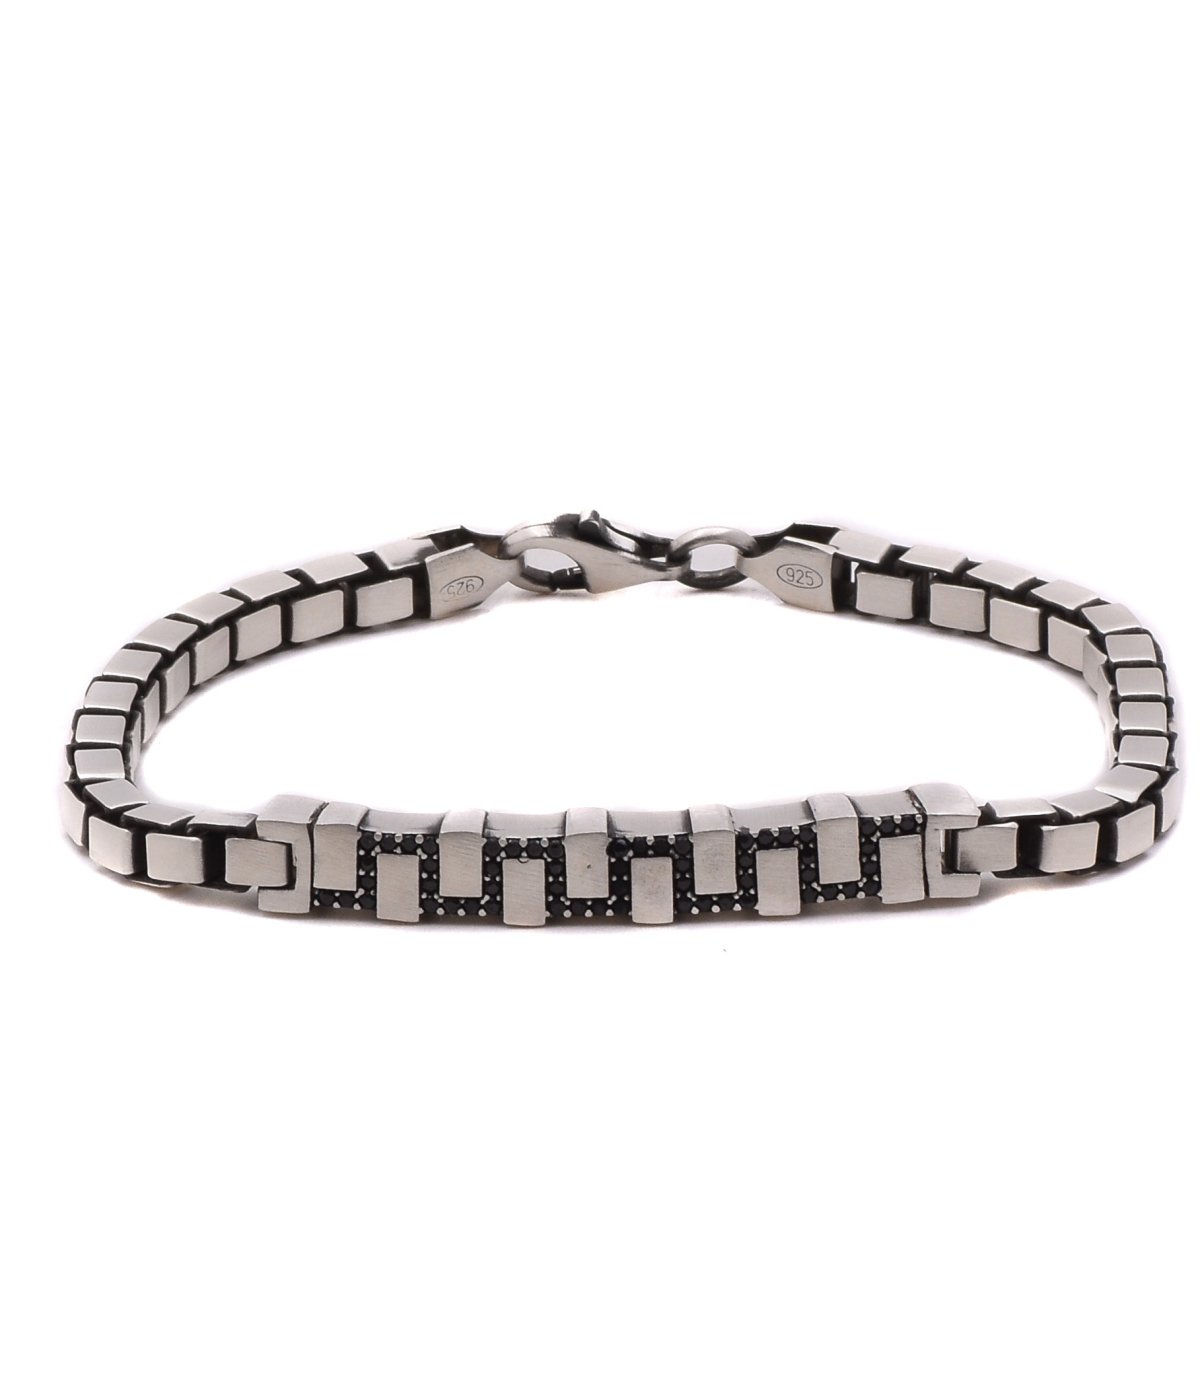 92.5 Silver Bracelet for boys with antic finish